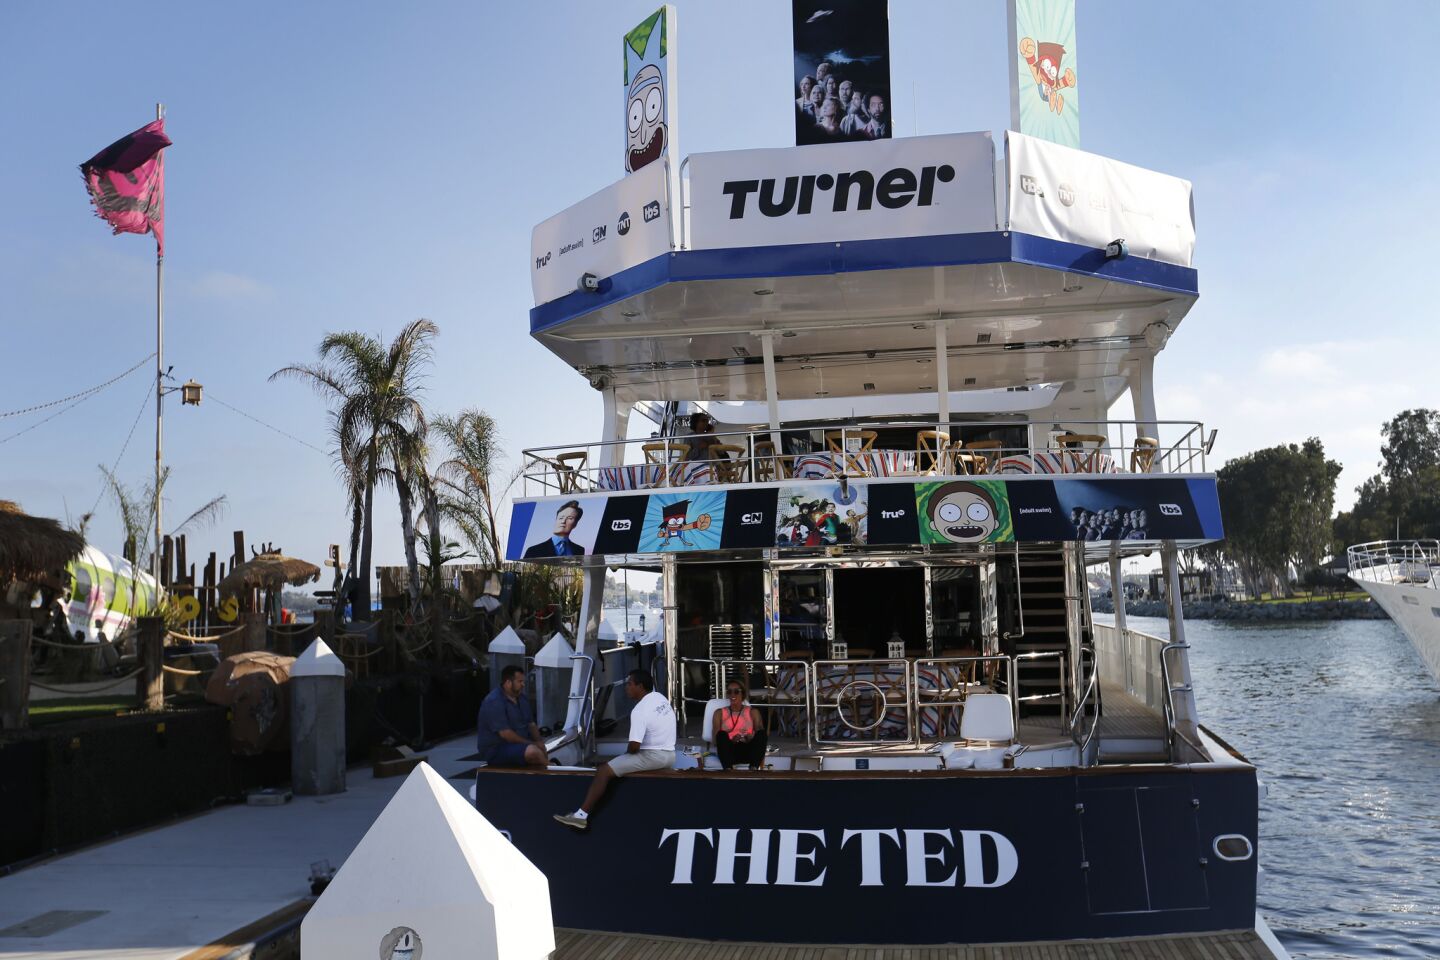 The Ted boat in a slip across from Comic-Con International 2017 at the San Diego Convention Center.